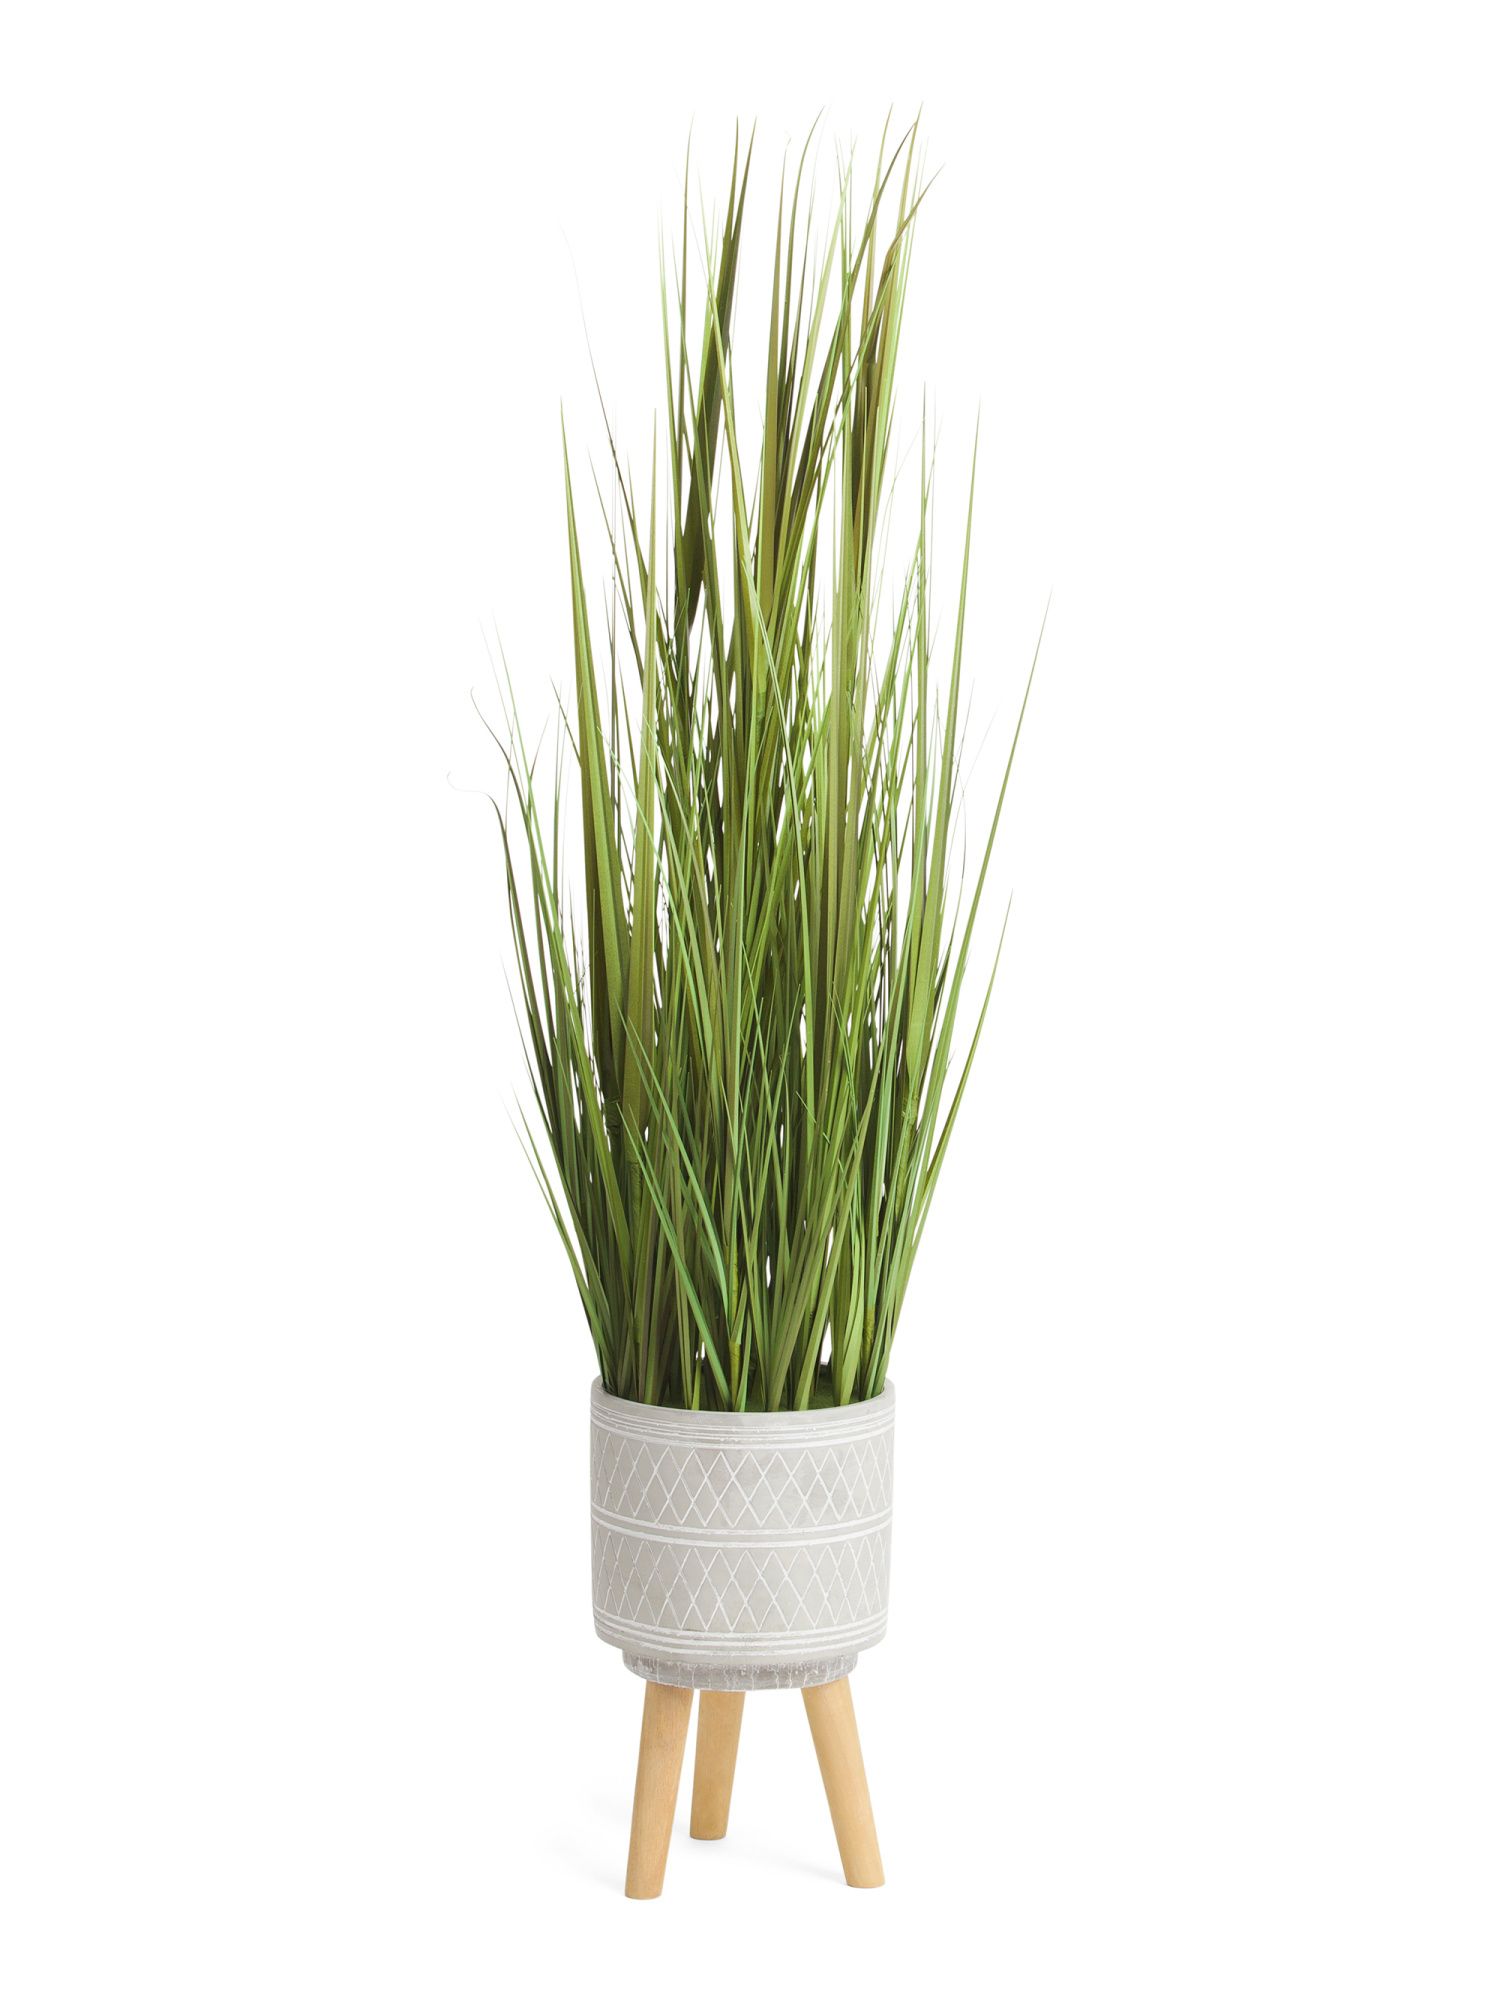 60in Onion Grass In Cement Pot With Wooden Stand | TJ Maxx